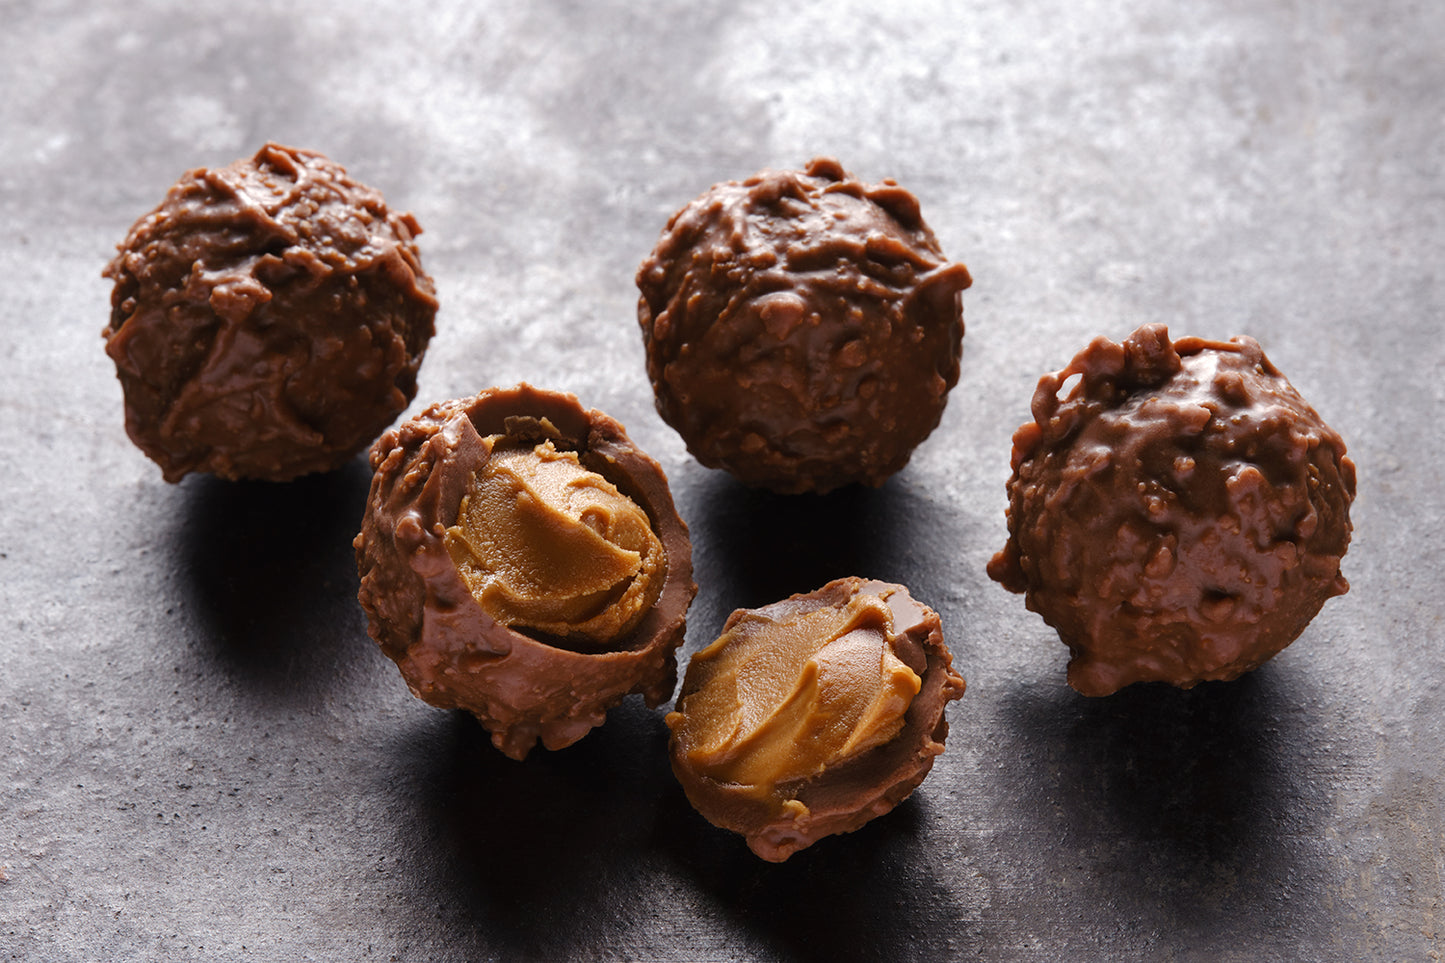 Caramelized Biscuit Truffles 210g